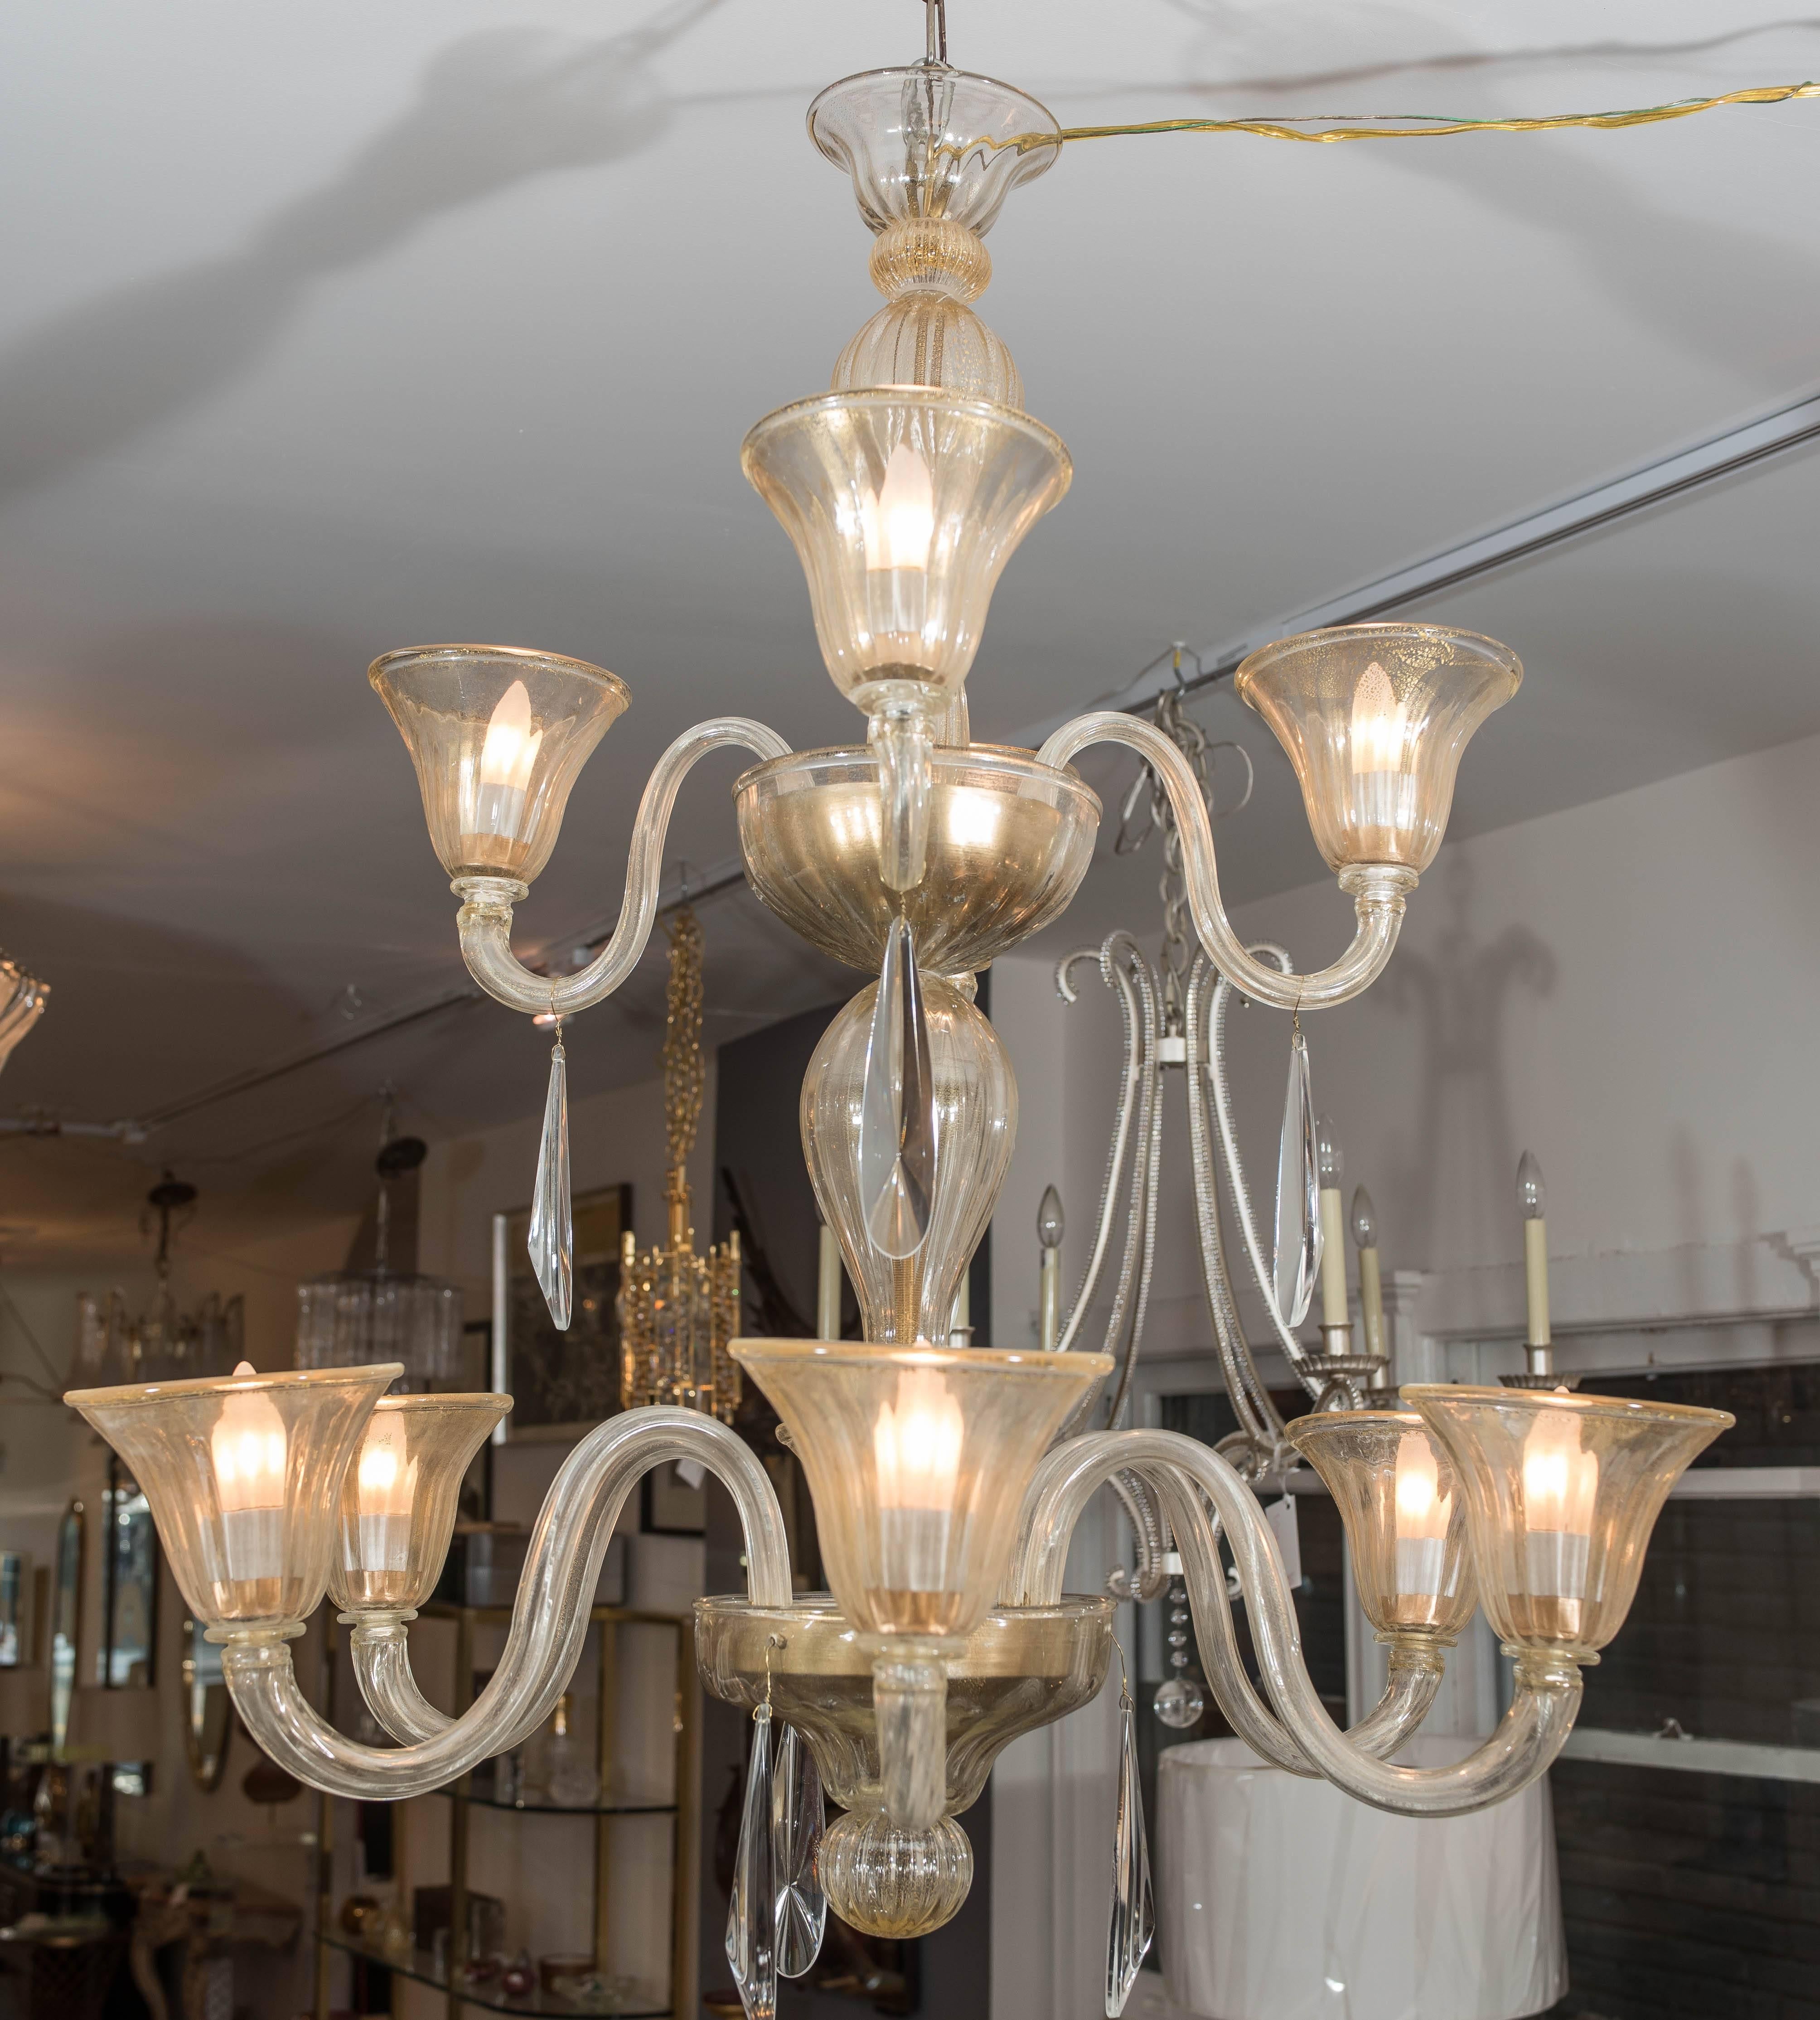 This large and elegant chandelier is beautifully made with gold infused glass and accented with clear crystal drops. It is wired for North America and can be easily disassembled for shipping.